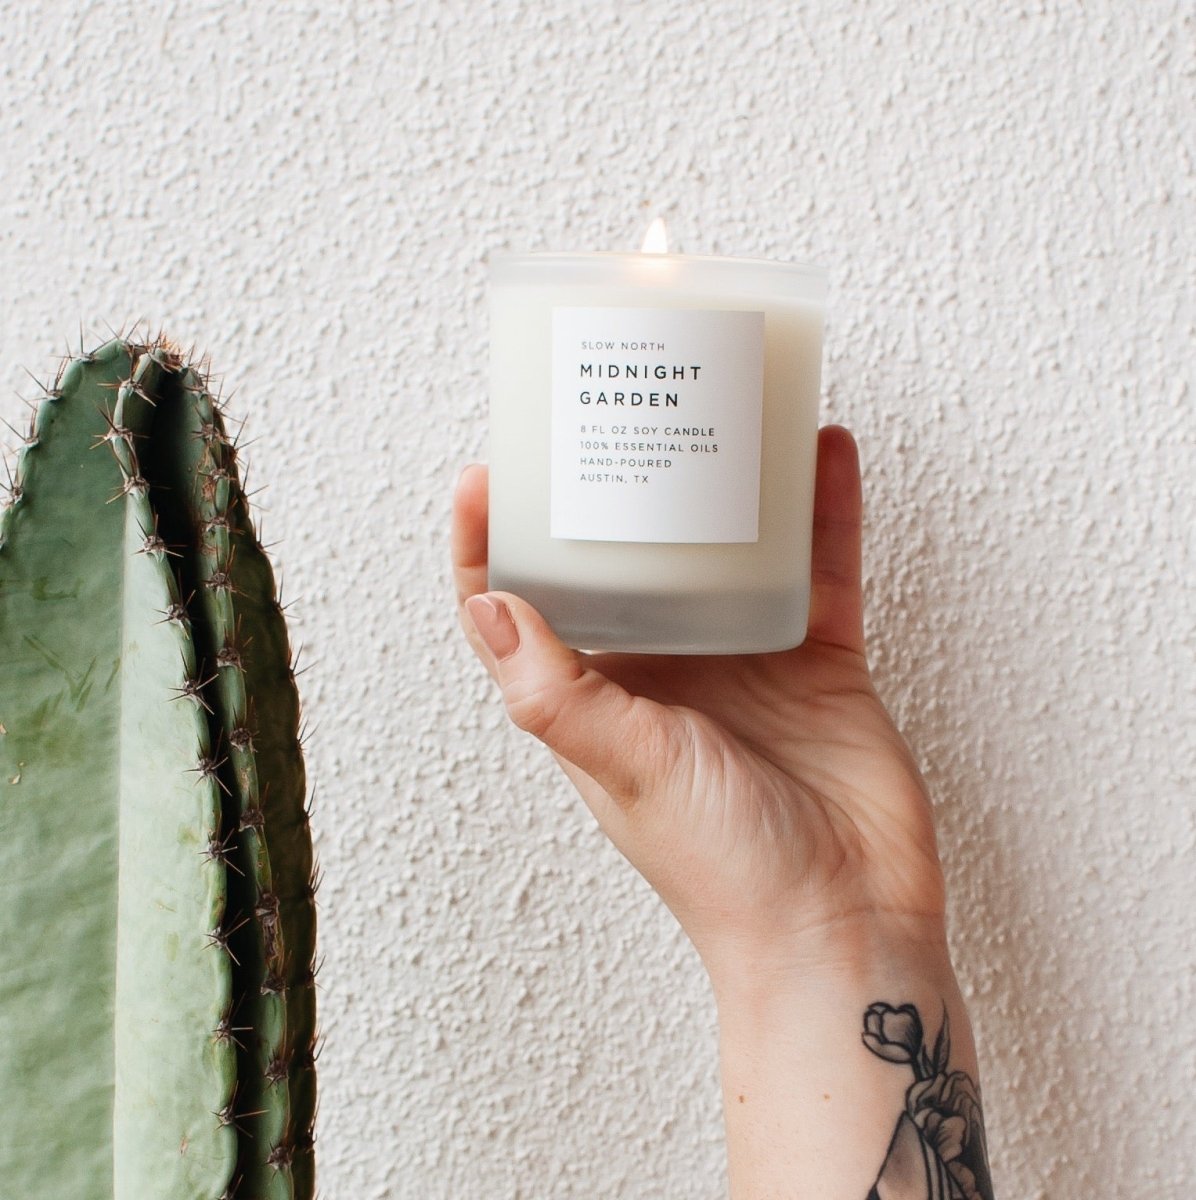 Slow North Midnight Garden | Lavender + Rosemary + Geranium | Frosted Candle, 8 oz - lily & onyx